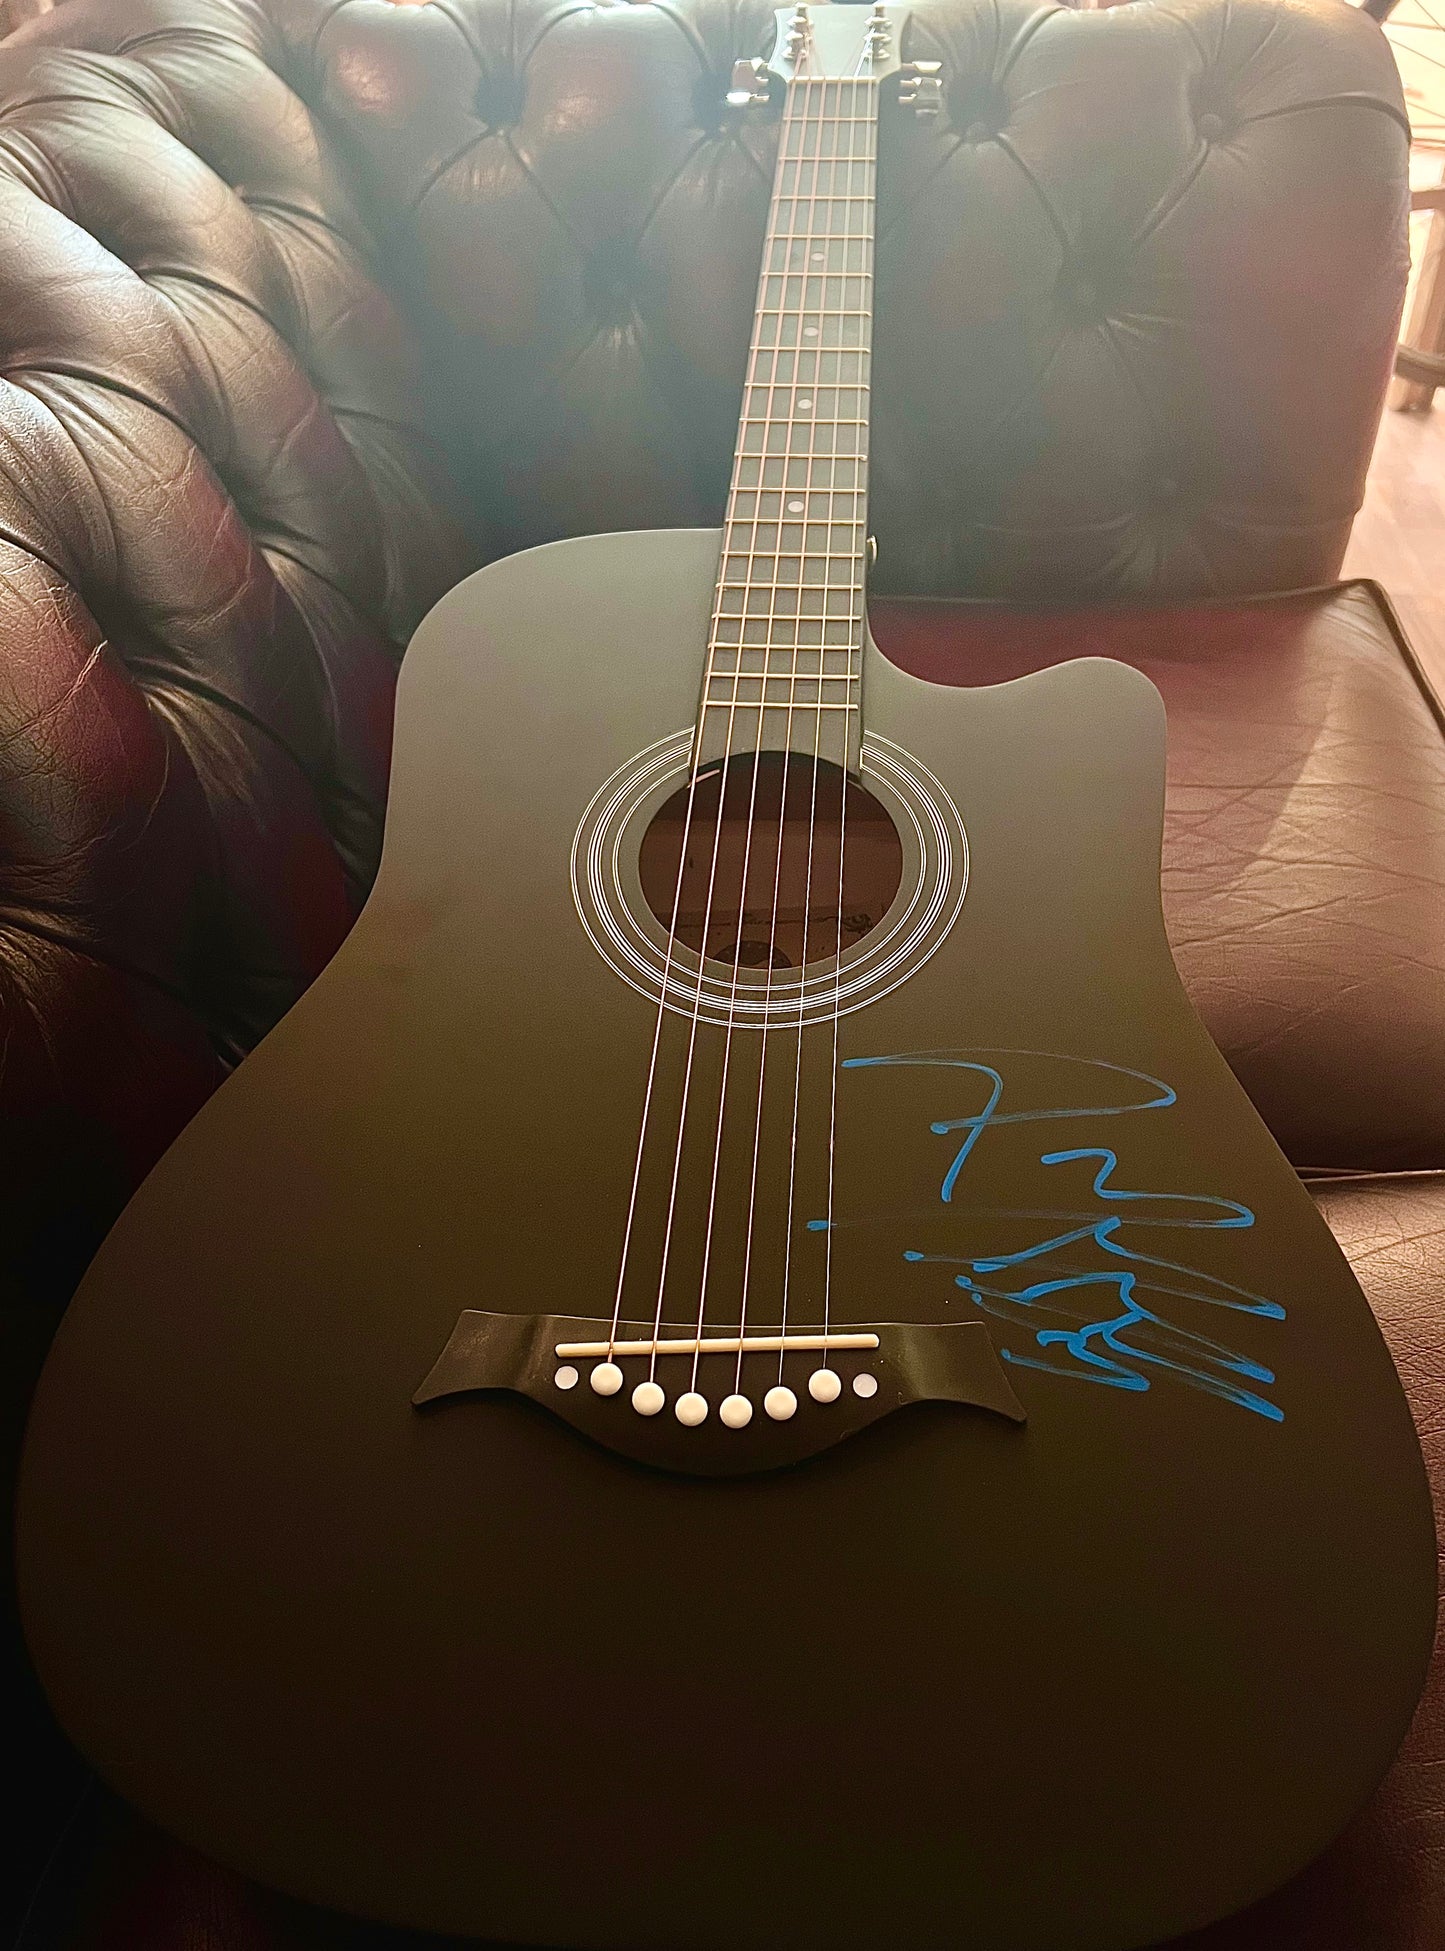 Featured Product: Signed Post Malone Black Acoustic Guitar